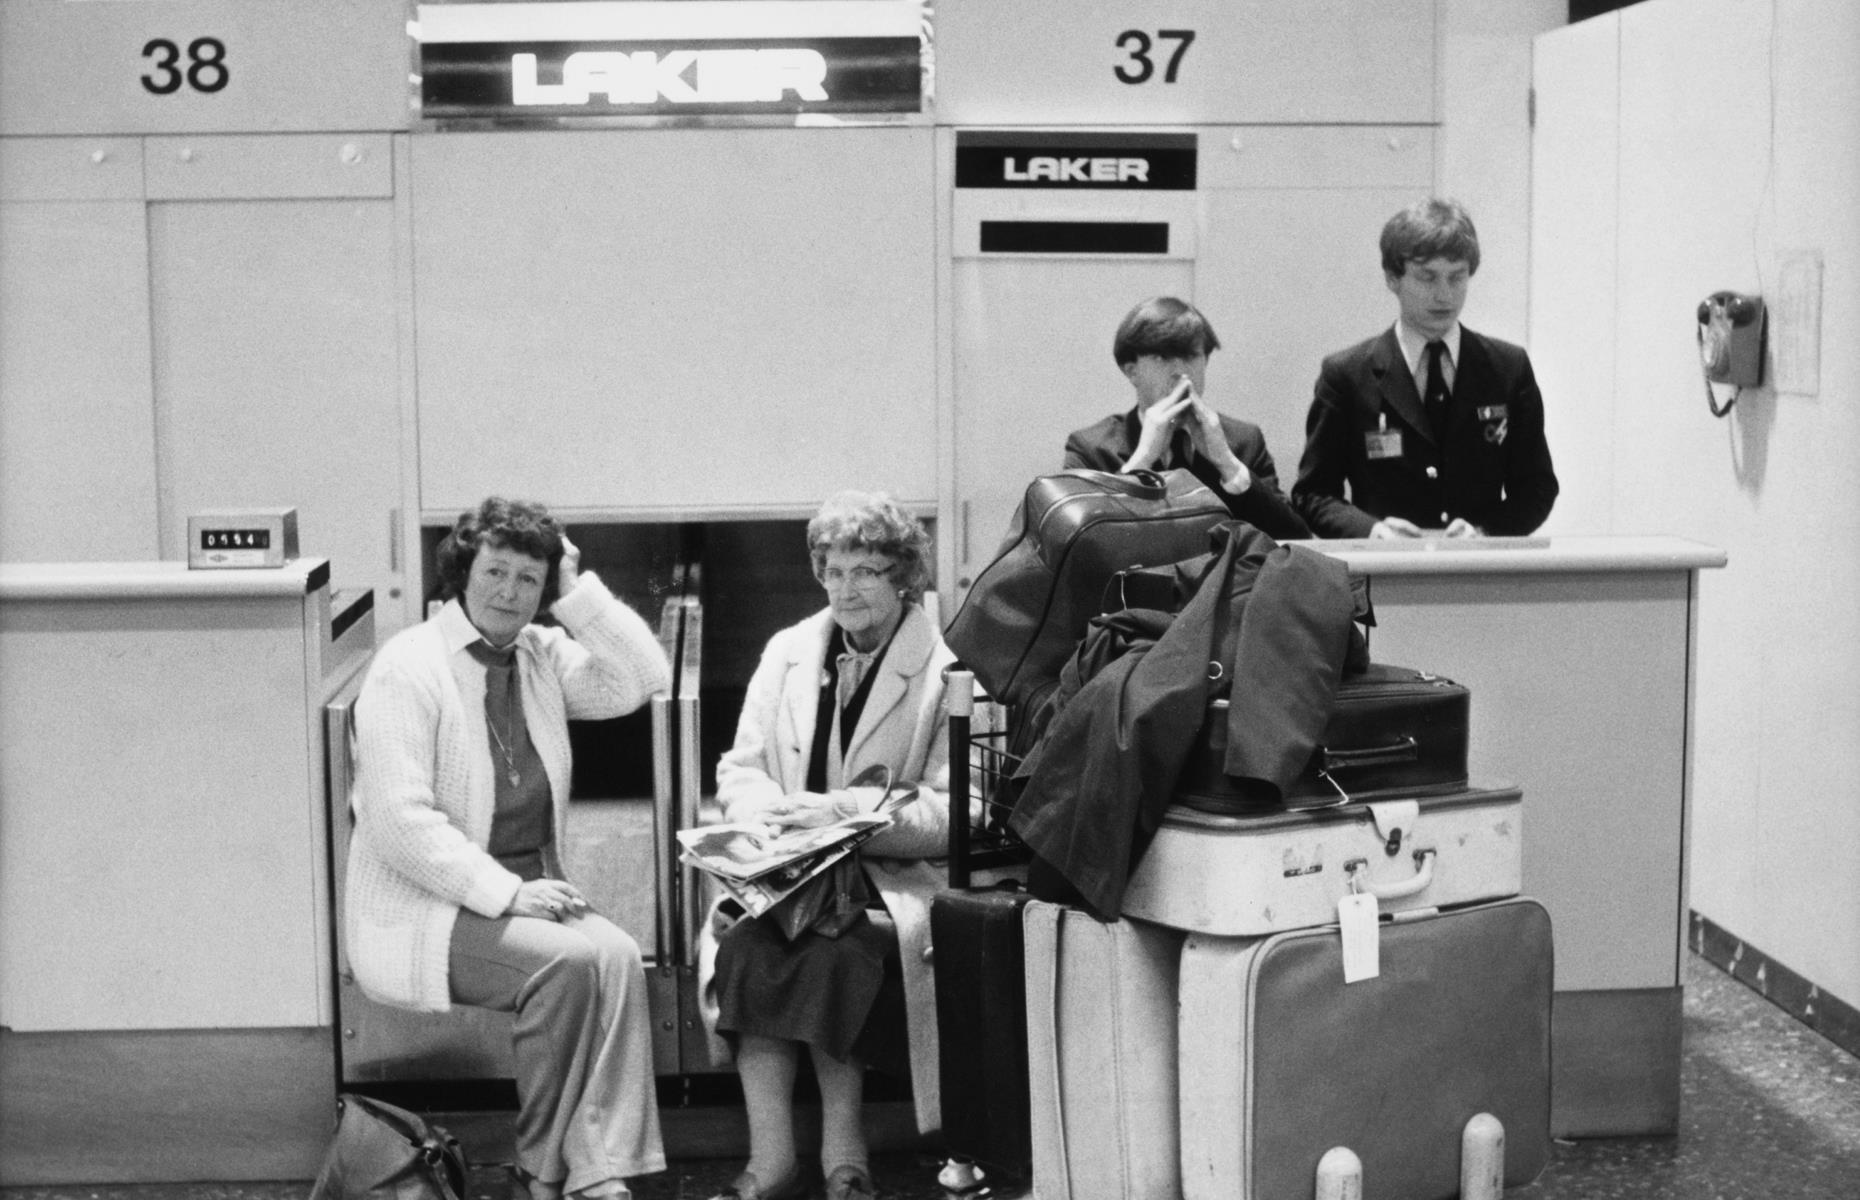 <p>Laker Airways collapsed in 1982, with debts amounting to $340 million. More than 6,000 passengers were left stranded in airports around the world. Here, exasperated travelers and dismayed Laker staff feel the brunt of the collapse on 5 February 1982. Now discover <a href="https://www.loveexploring.com/galleries/82971/groundbreaking-planes-that-changed-the-world?page=1">the groundbreaking planes that changed the world</a>.</p>